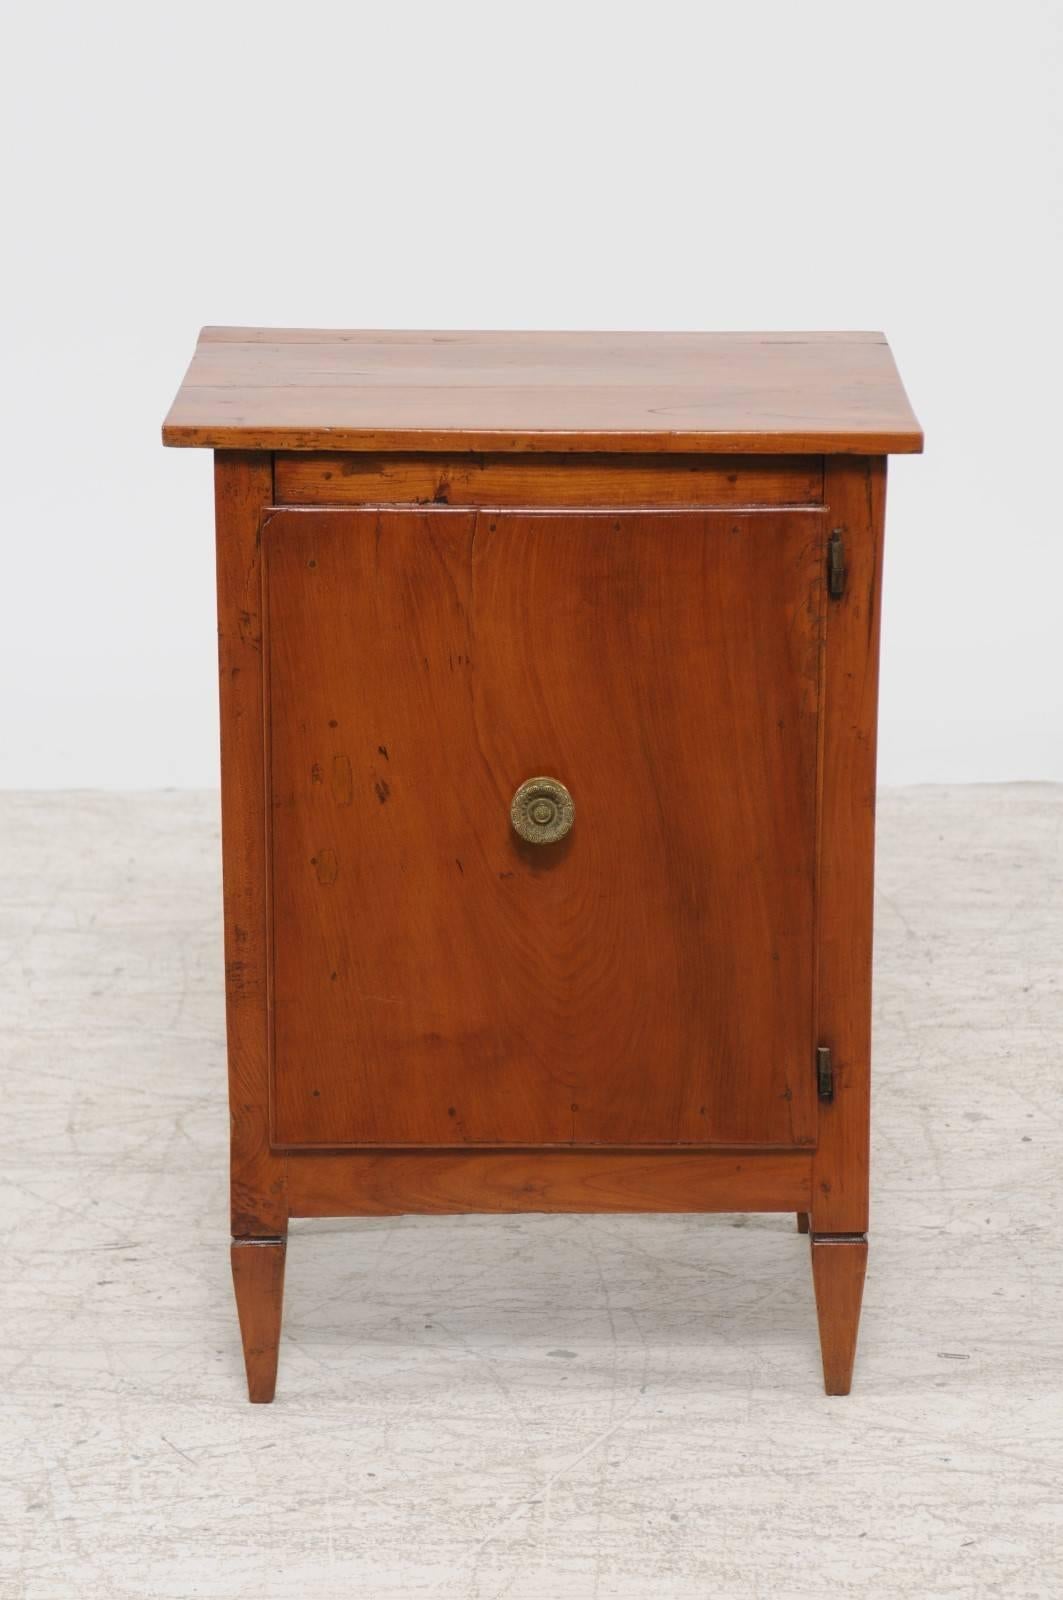 An Italian neoclassical period walnut single-door petite cabinet from the early 19th century. This Italian small size cabinet features a rectangular planked top sitting above a single door opening with a round bronze pull. This door opens to reveal